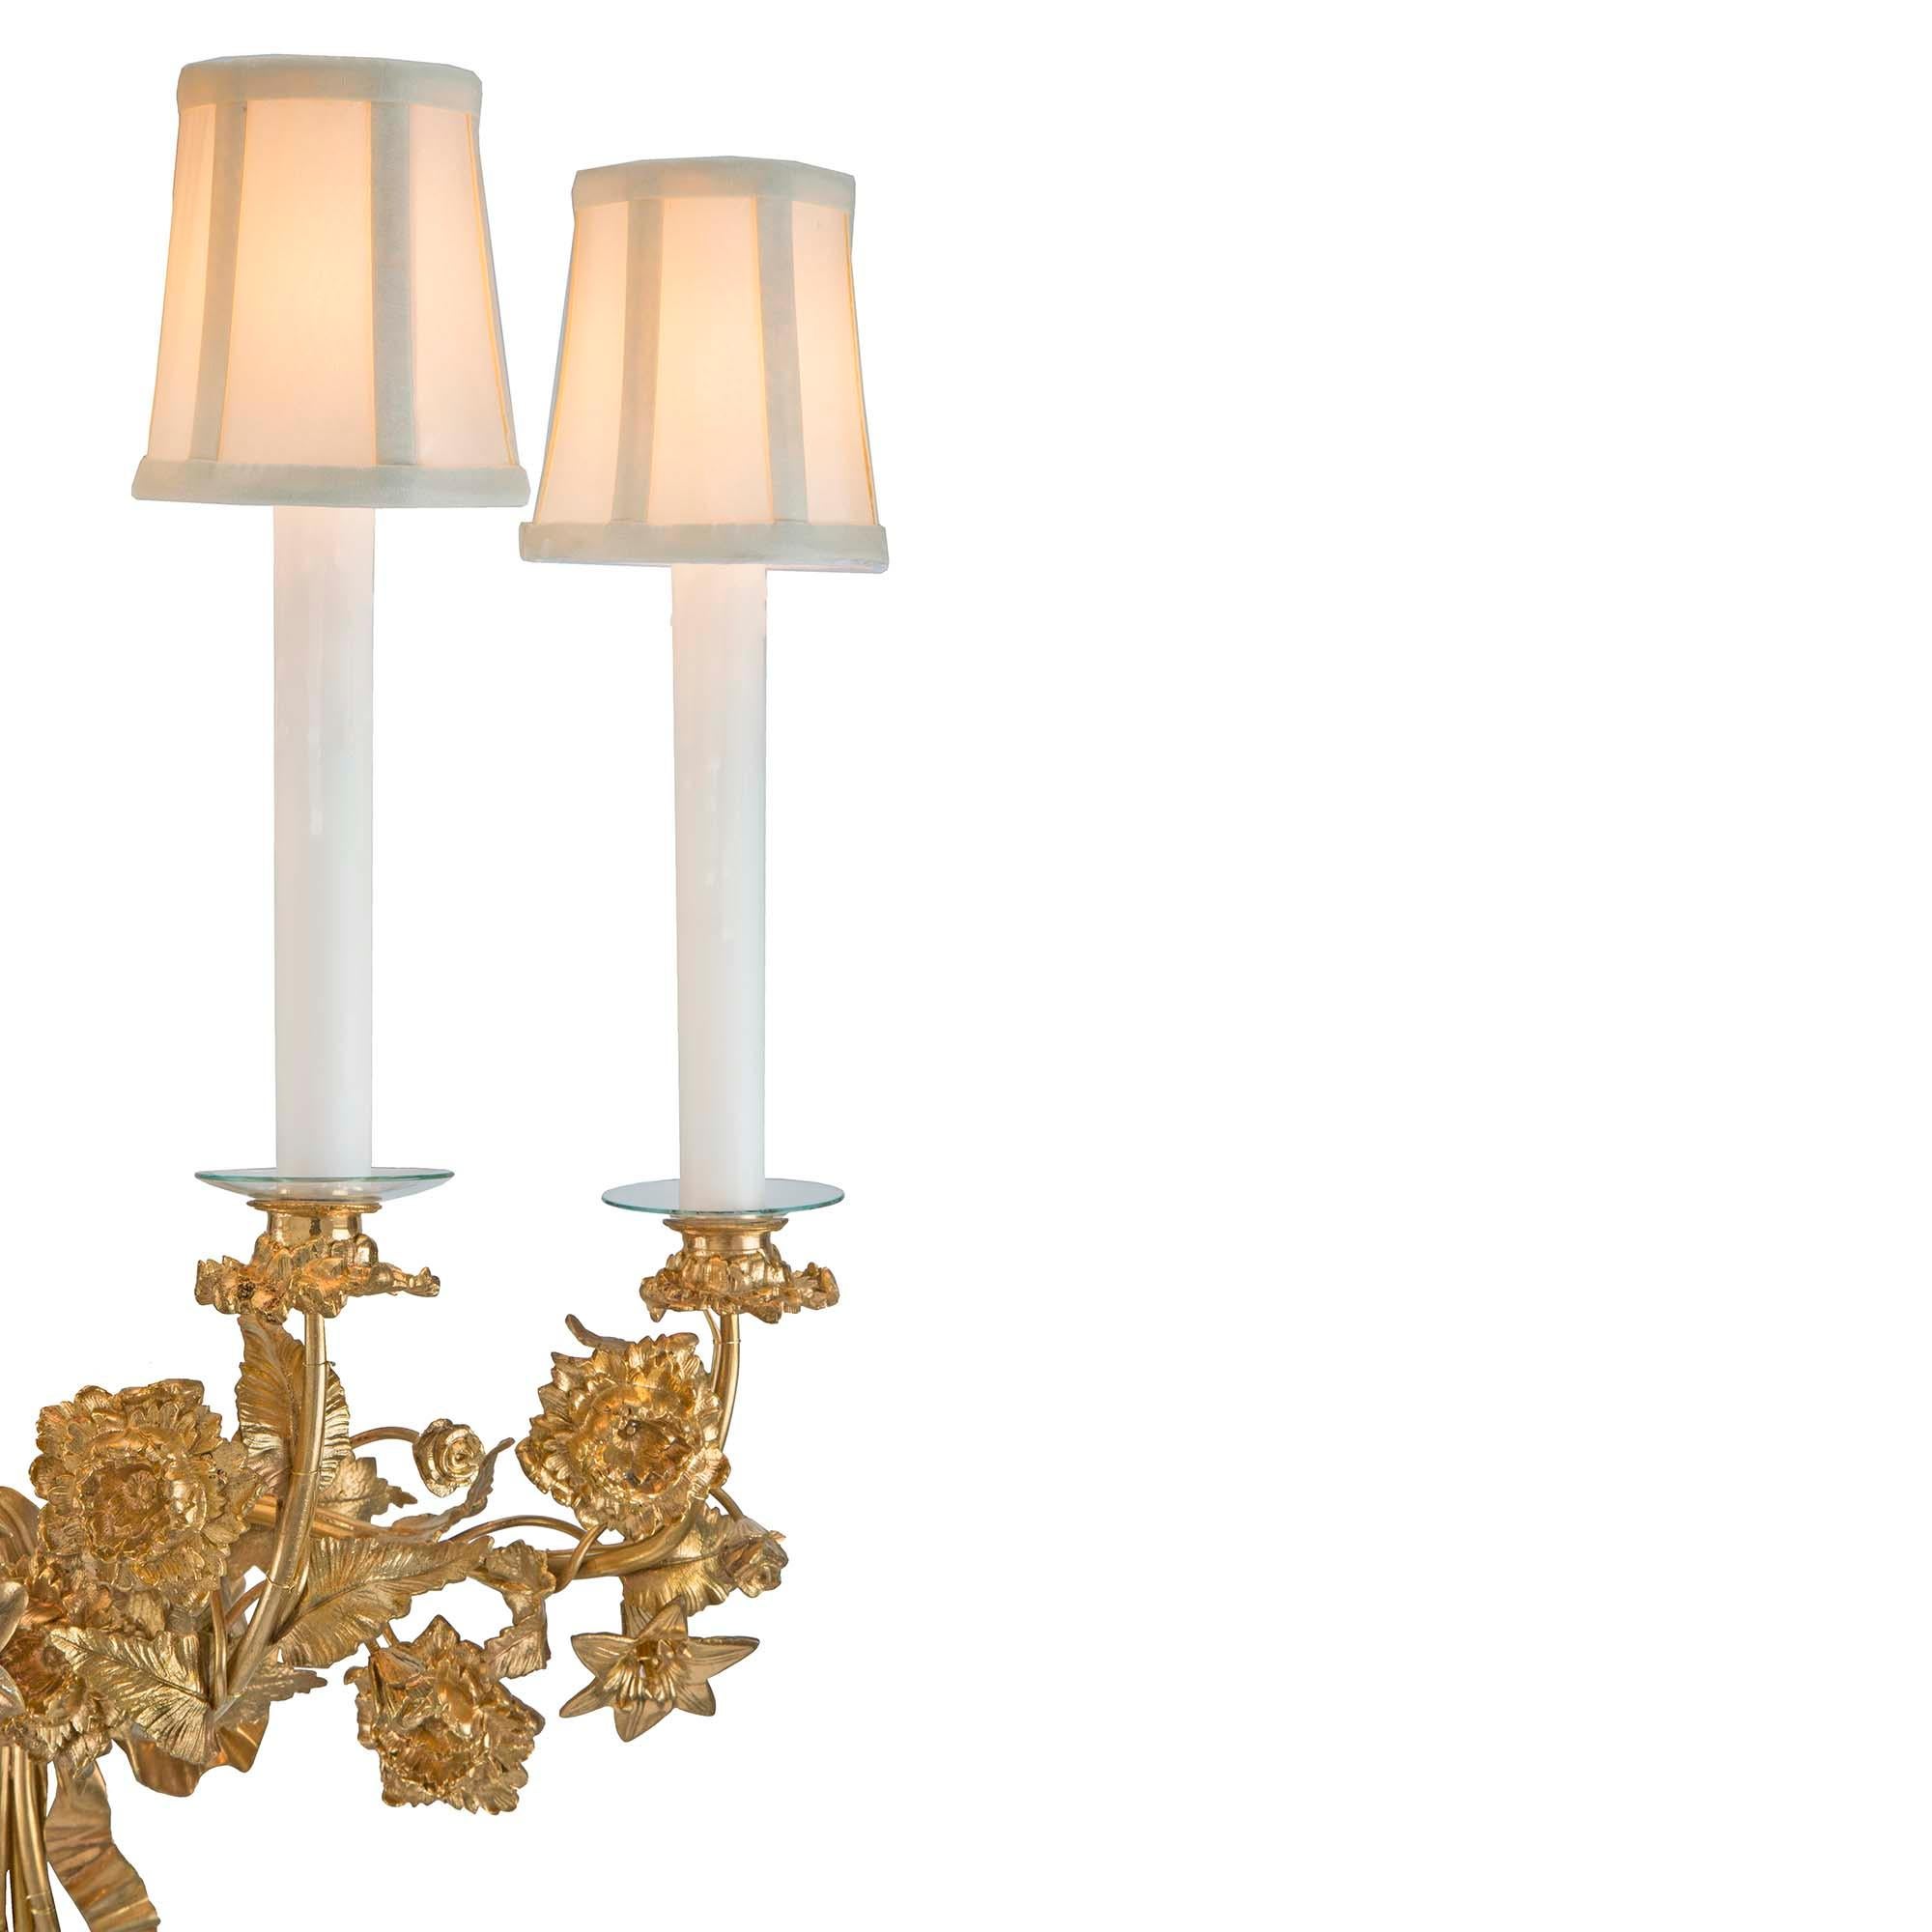 Pair of French 19th Century Louis XVI Style Ormolu Sconces For Sale 1